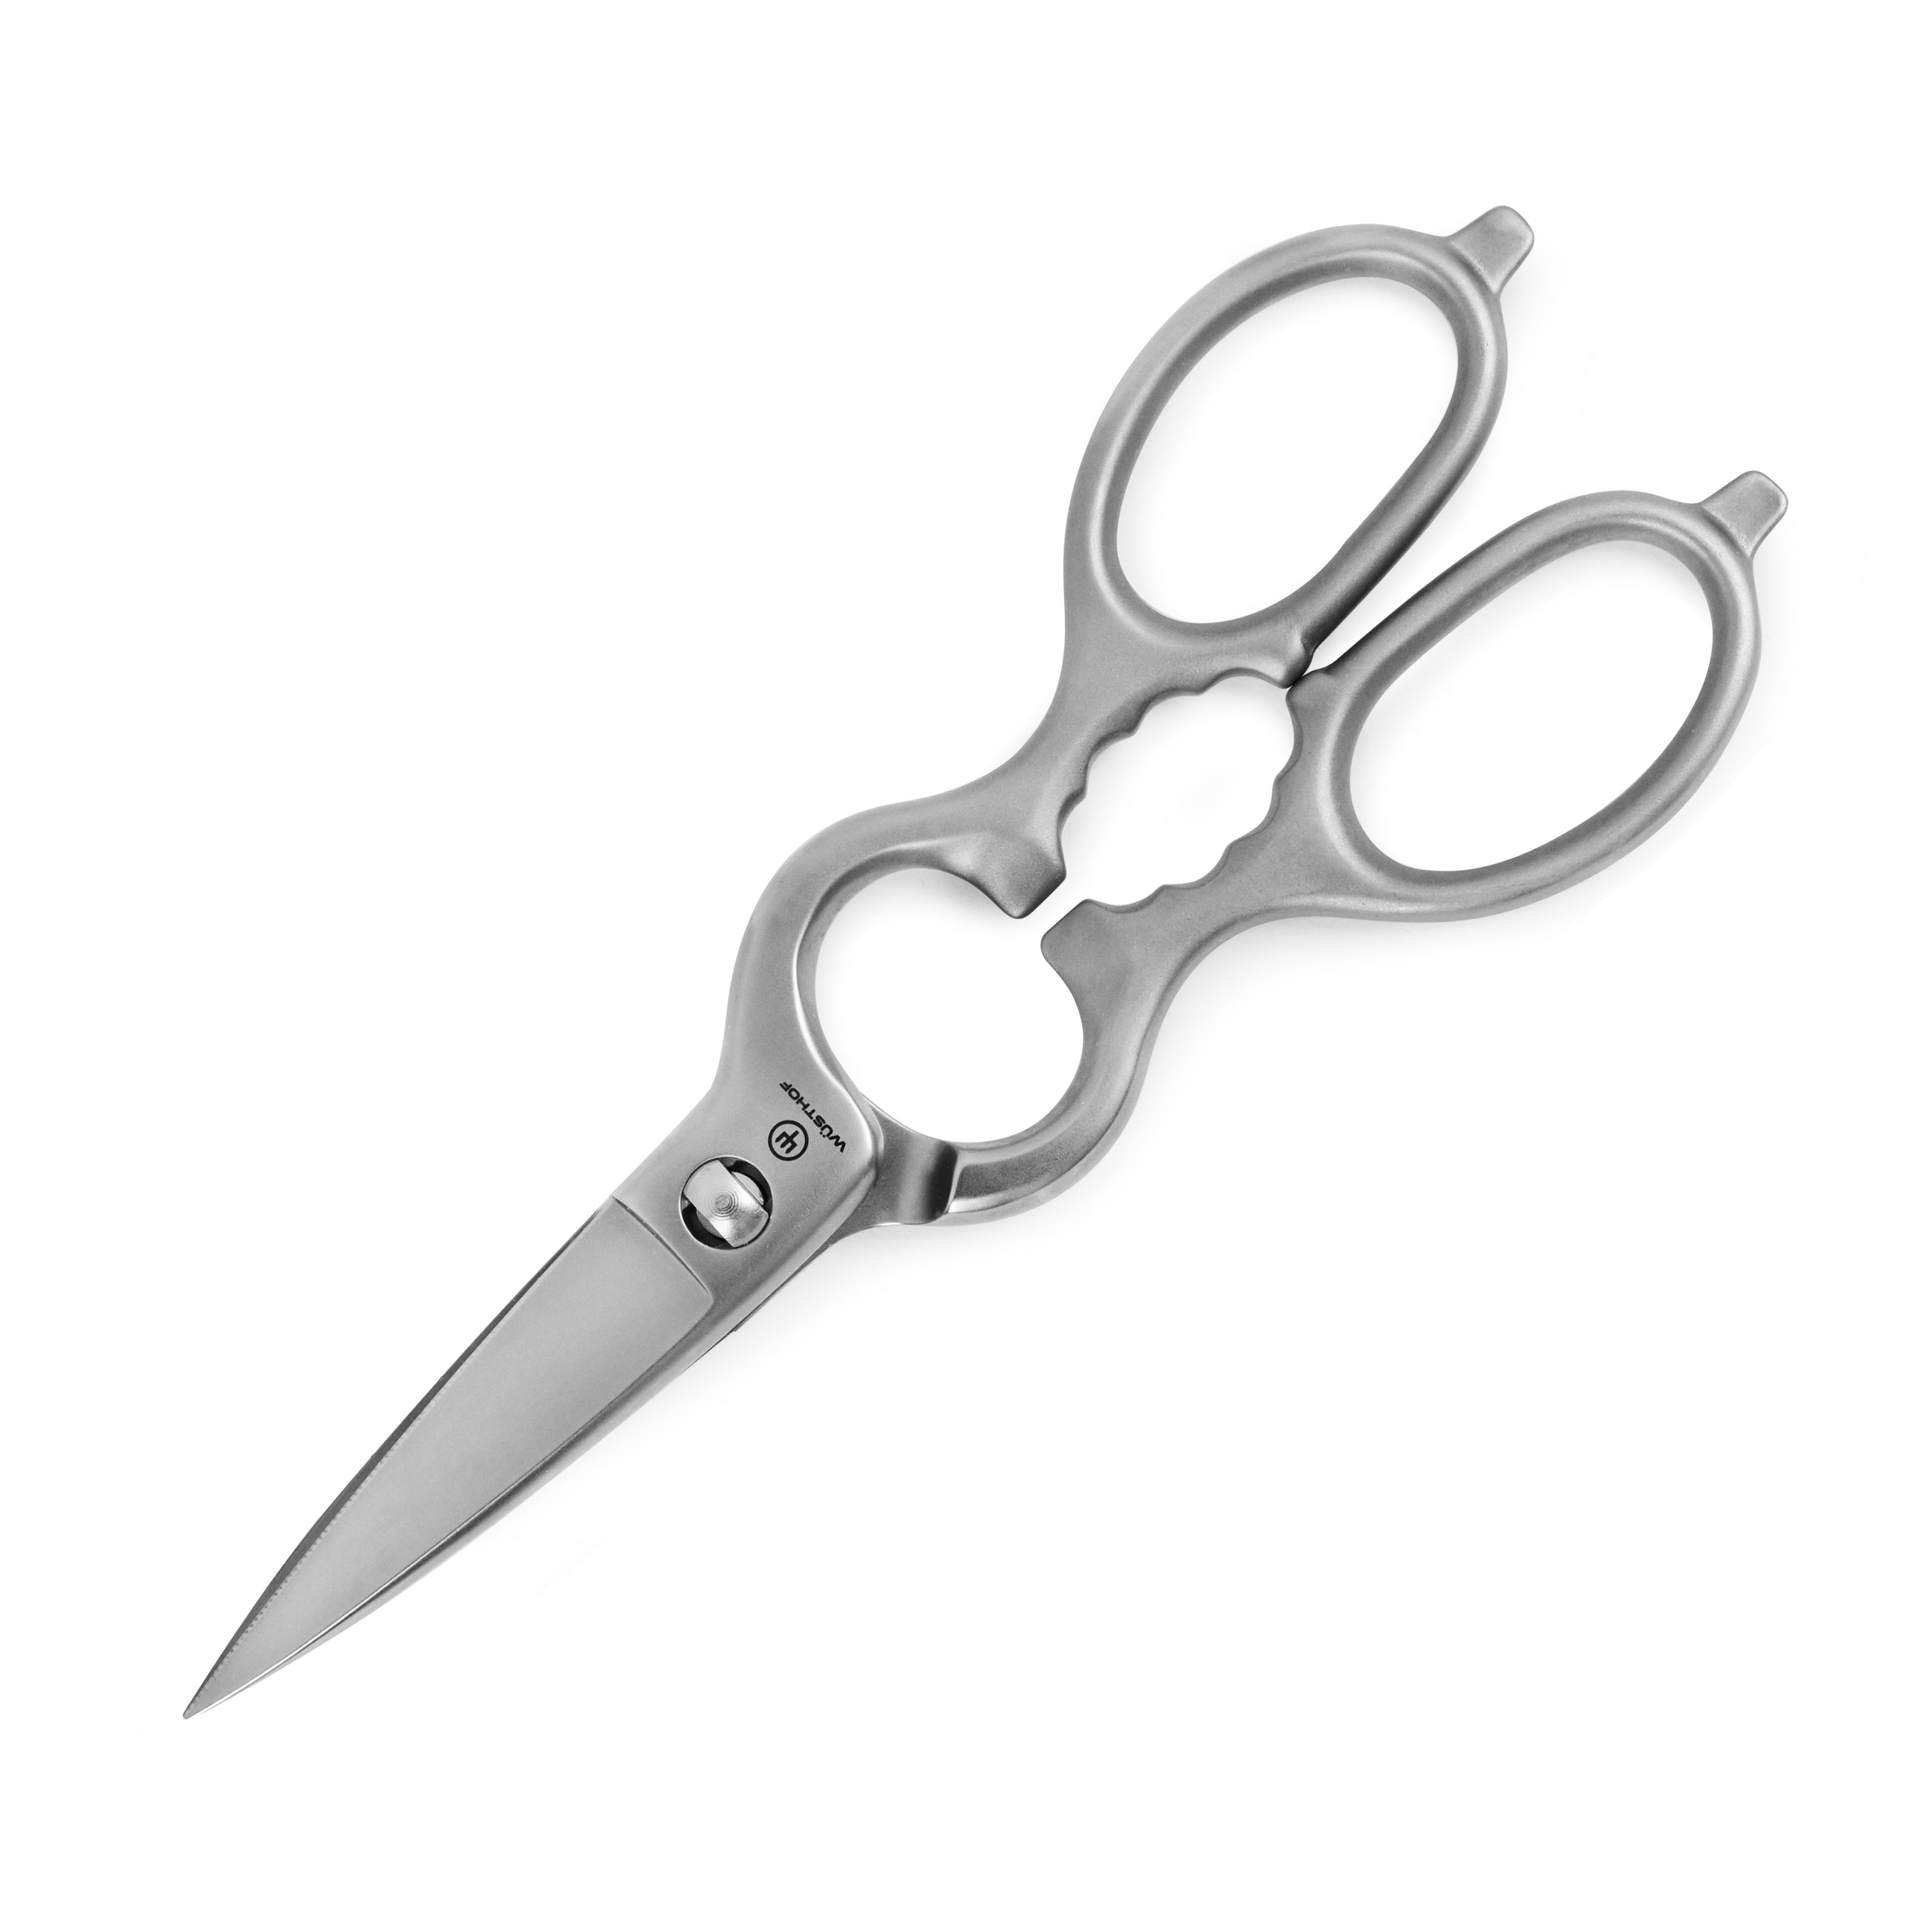 Wusthof Stainless Steel Kitchen Shears Cutlery And More